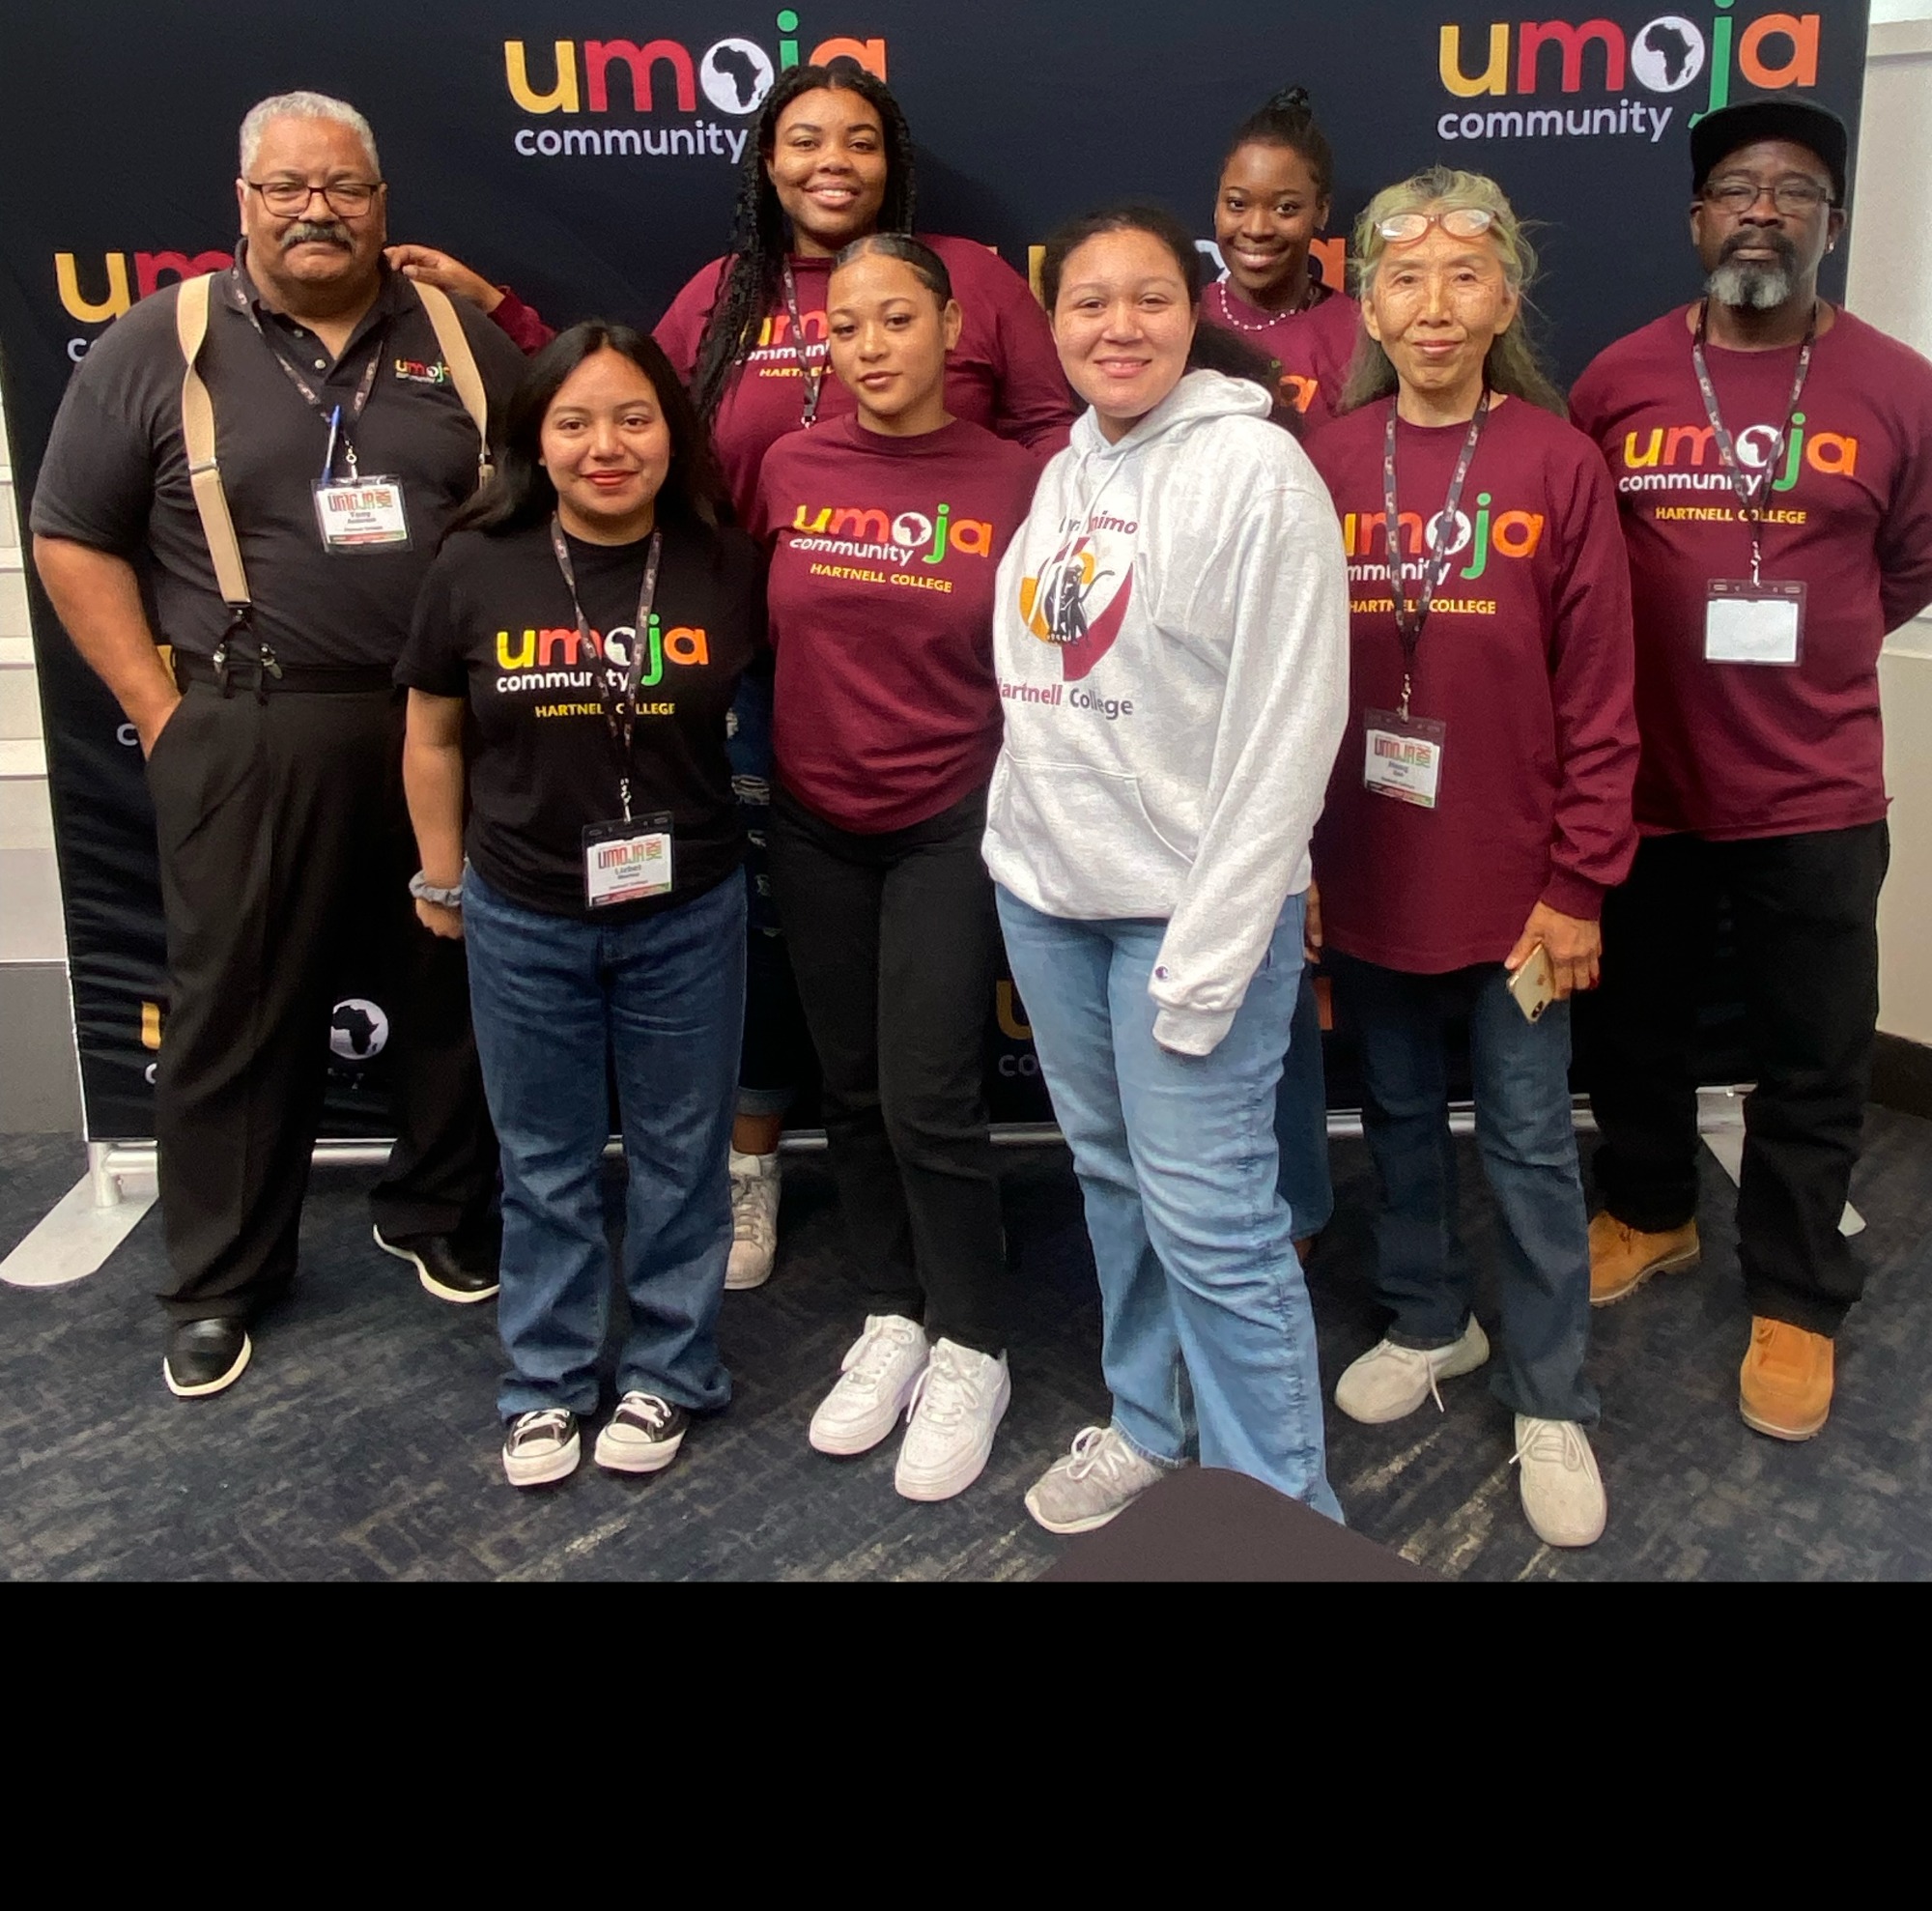 group picture of students at umoja conference